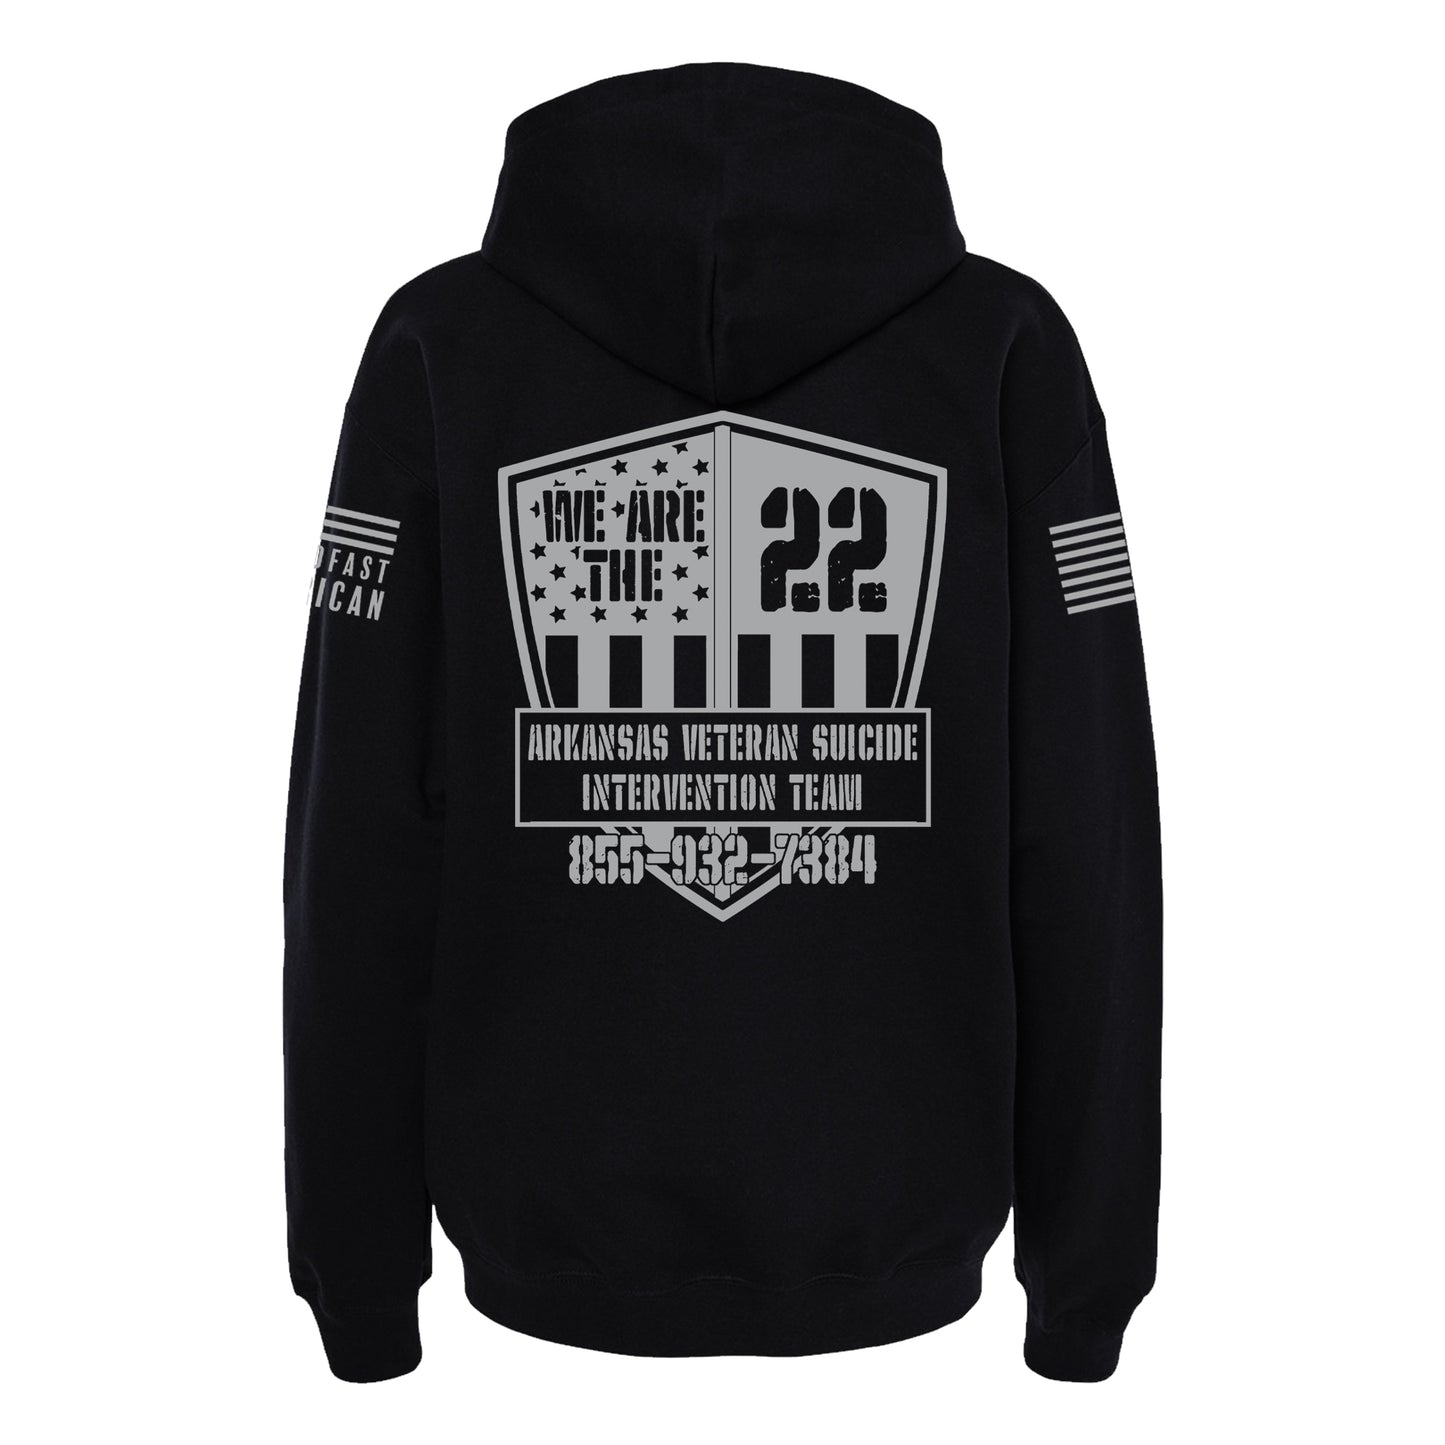 We Are The 22, SoftStyle Hoodie, Black